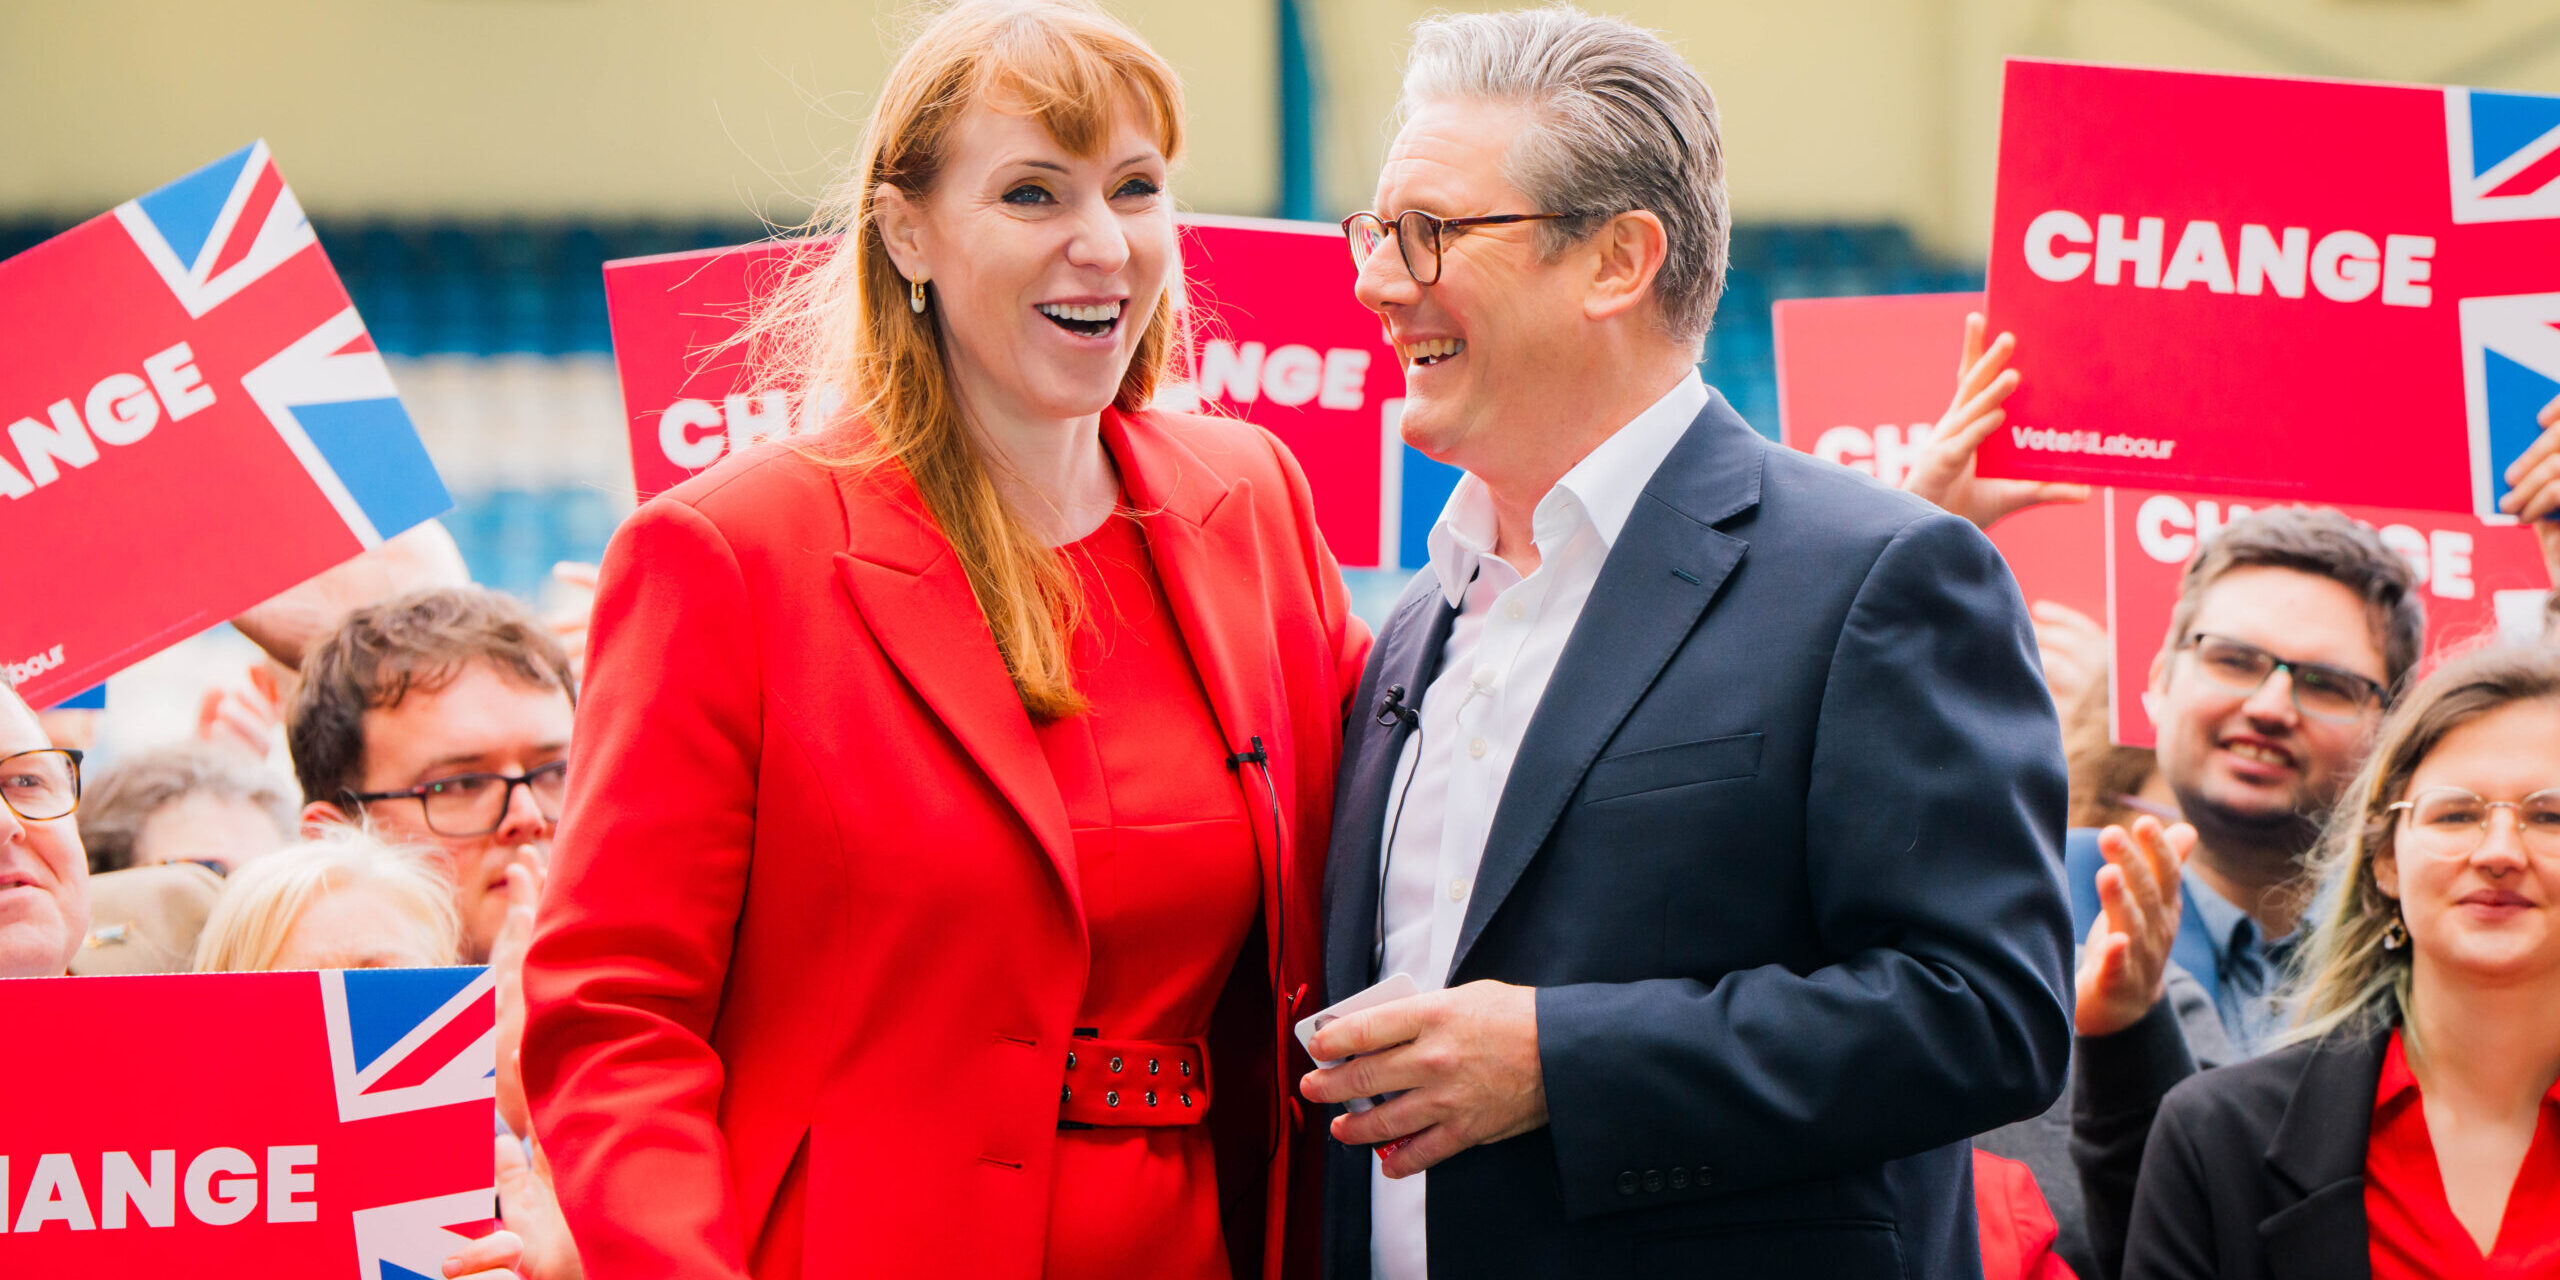 Keir Starmer and Angela Rayner stand laughing in front of a crowd holding red placards that say 'Change' on them